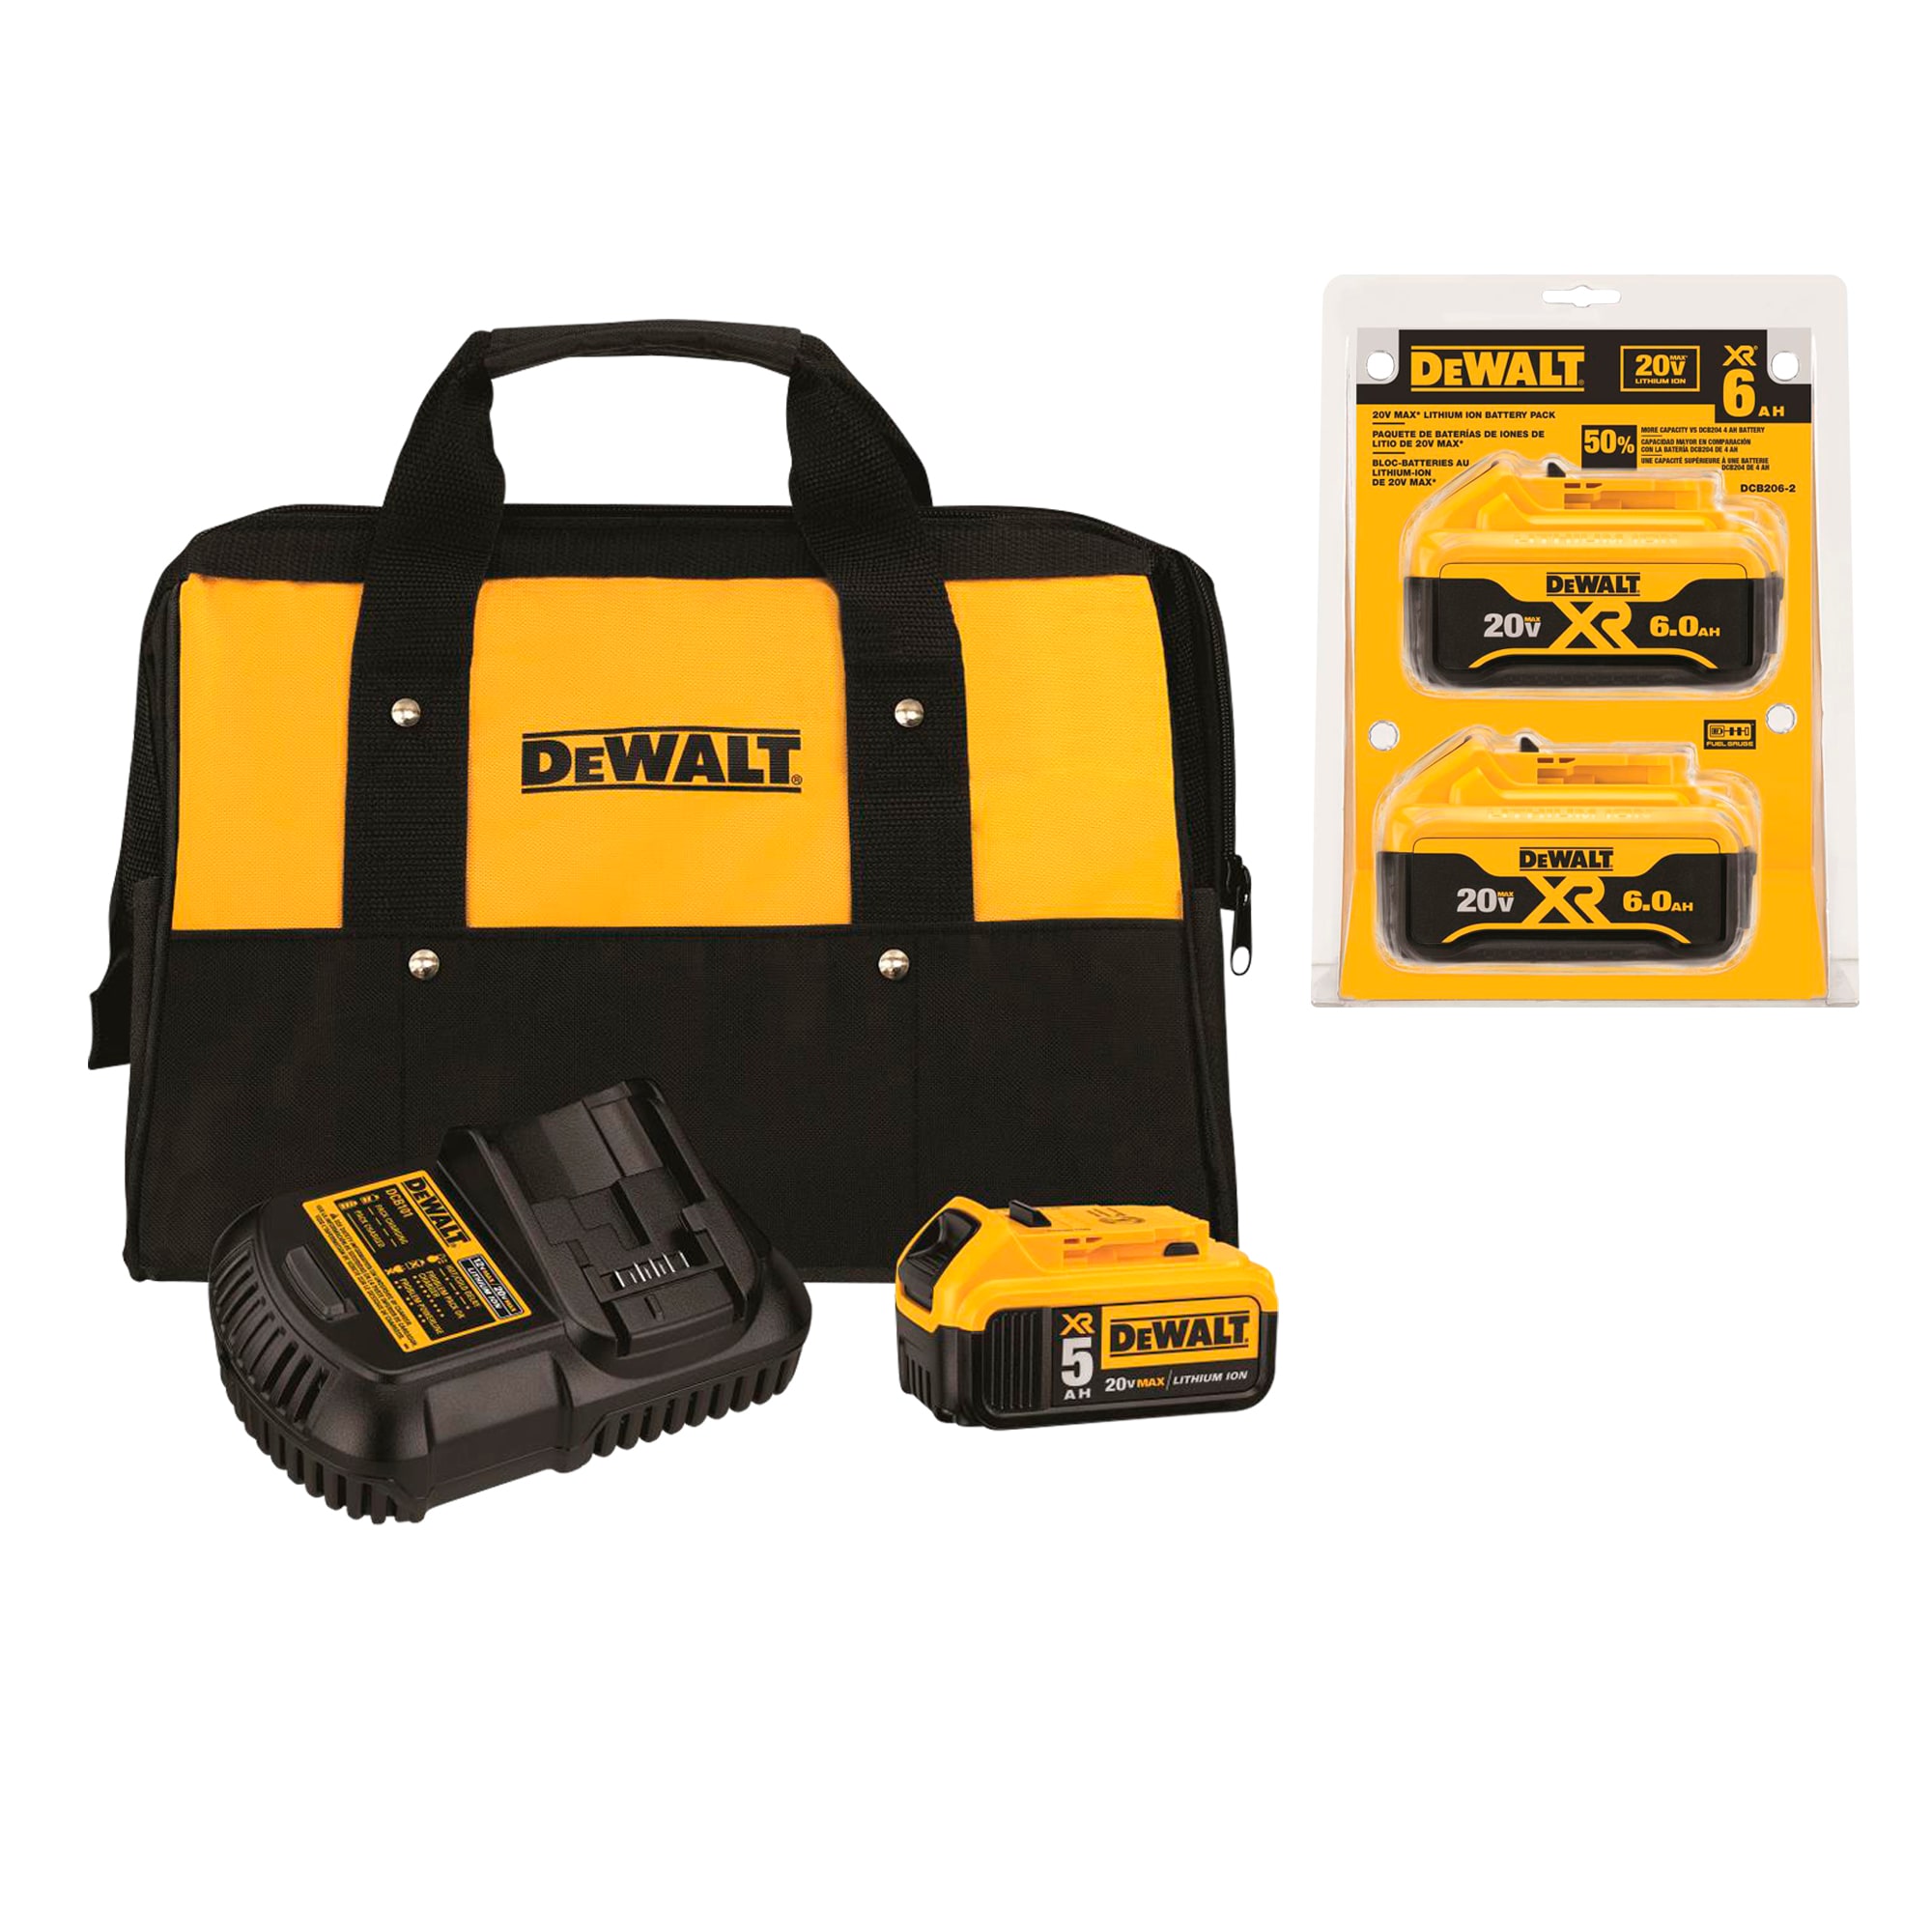 DEWALT POWERSTACK 20-V 5 Amp-Hour; Lithium-ion Battery and Charger (Charger  Included) in the Power Tool Batteries & Chargers department at